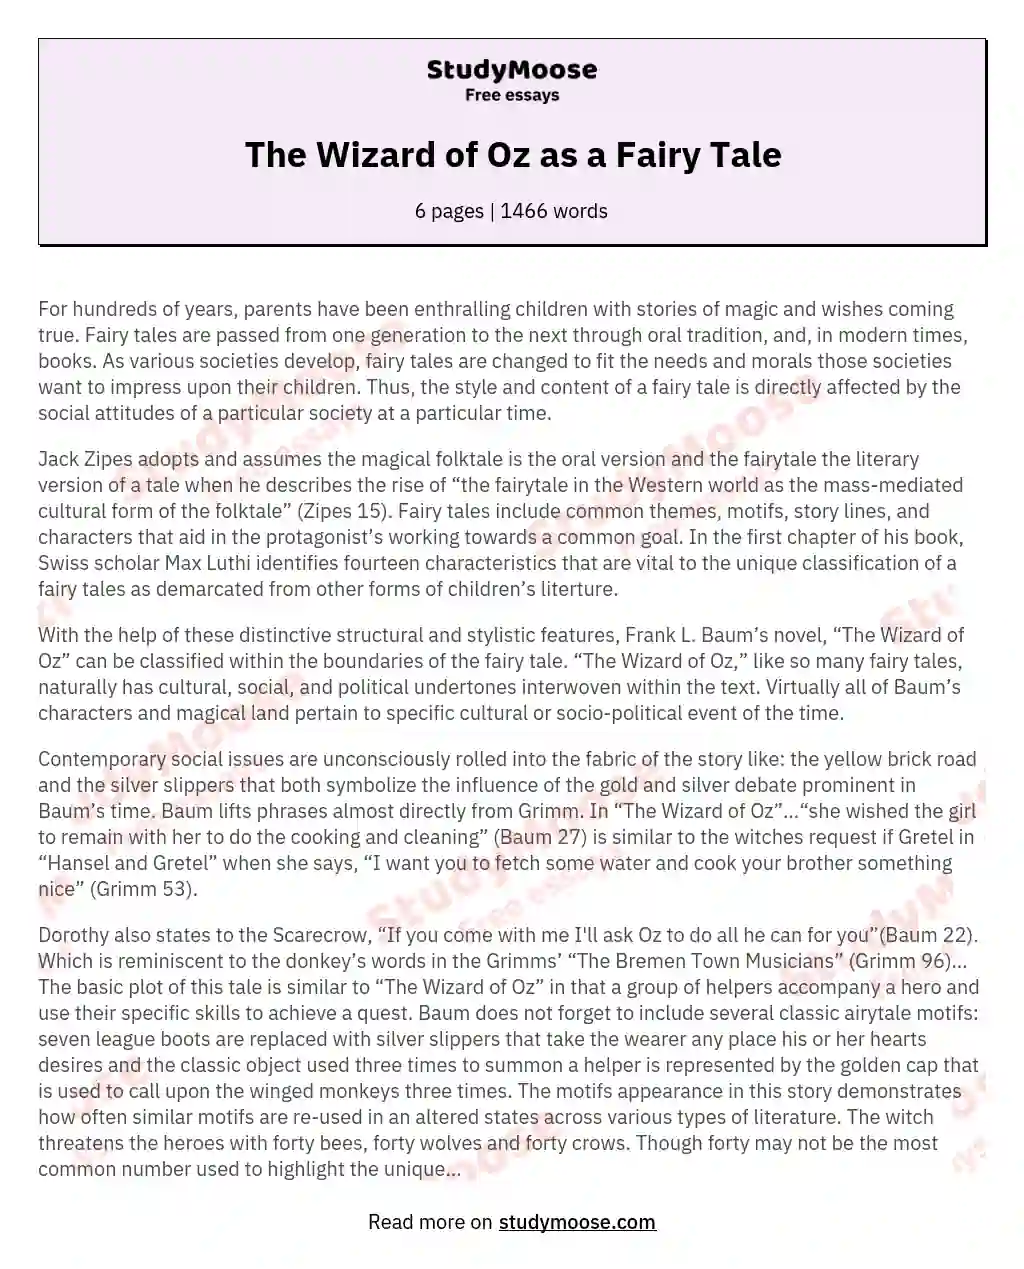 The Wizard of Oz as a Fairy Tale essay